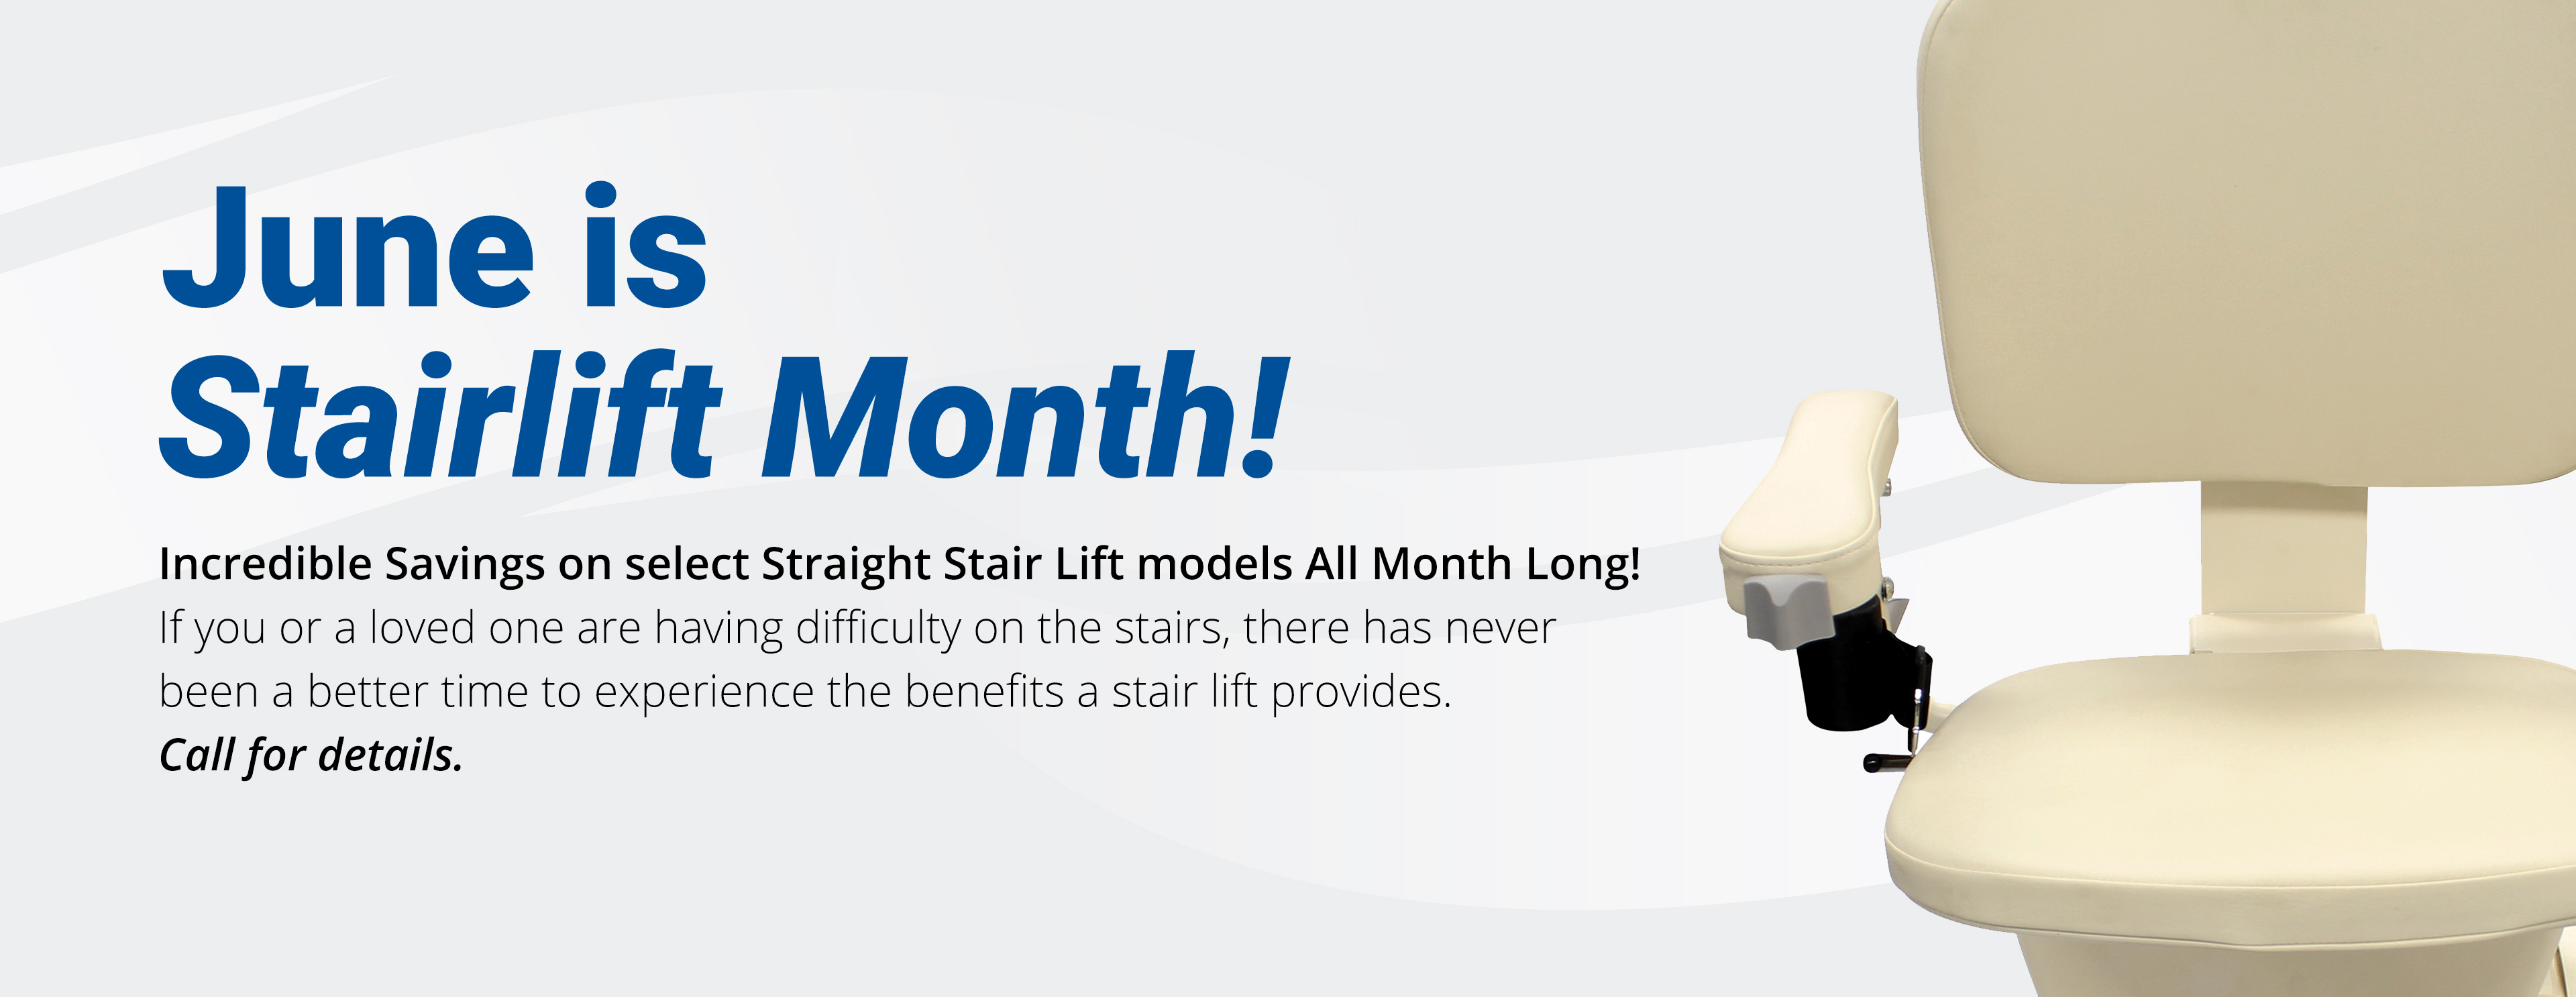 June is Stair Lift Month. Call for details!